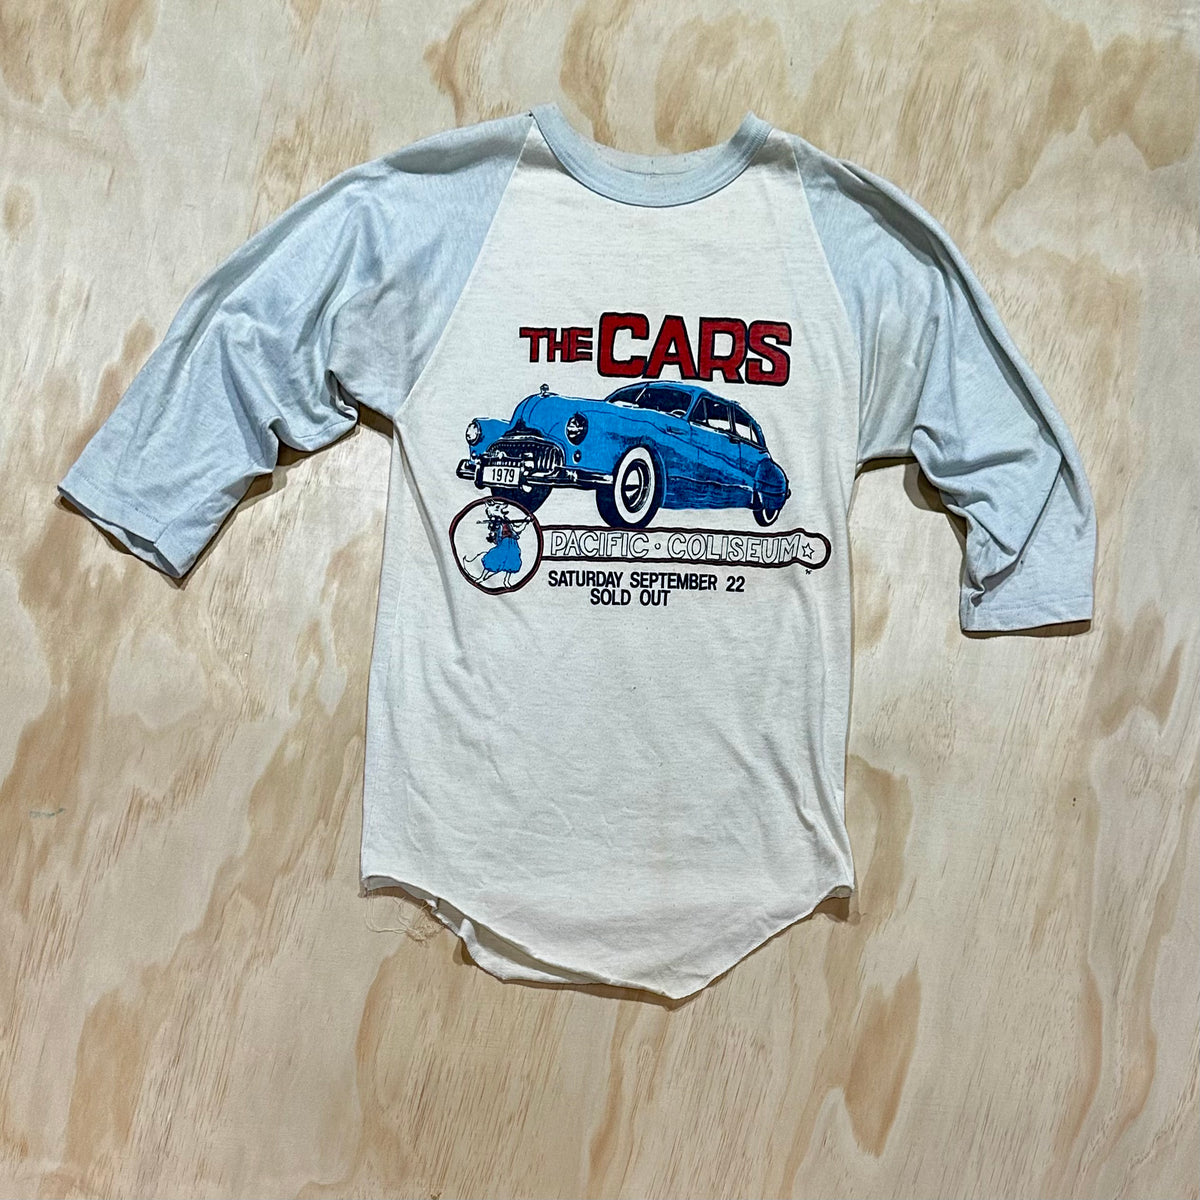 Vintage RARE 1970s The Cars Band Raglan Tee 'Pacific Coliseum Sold Out'